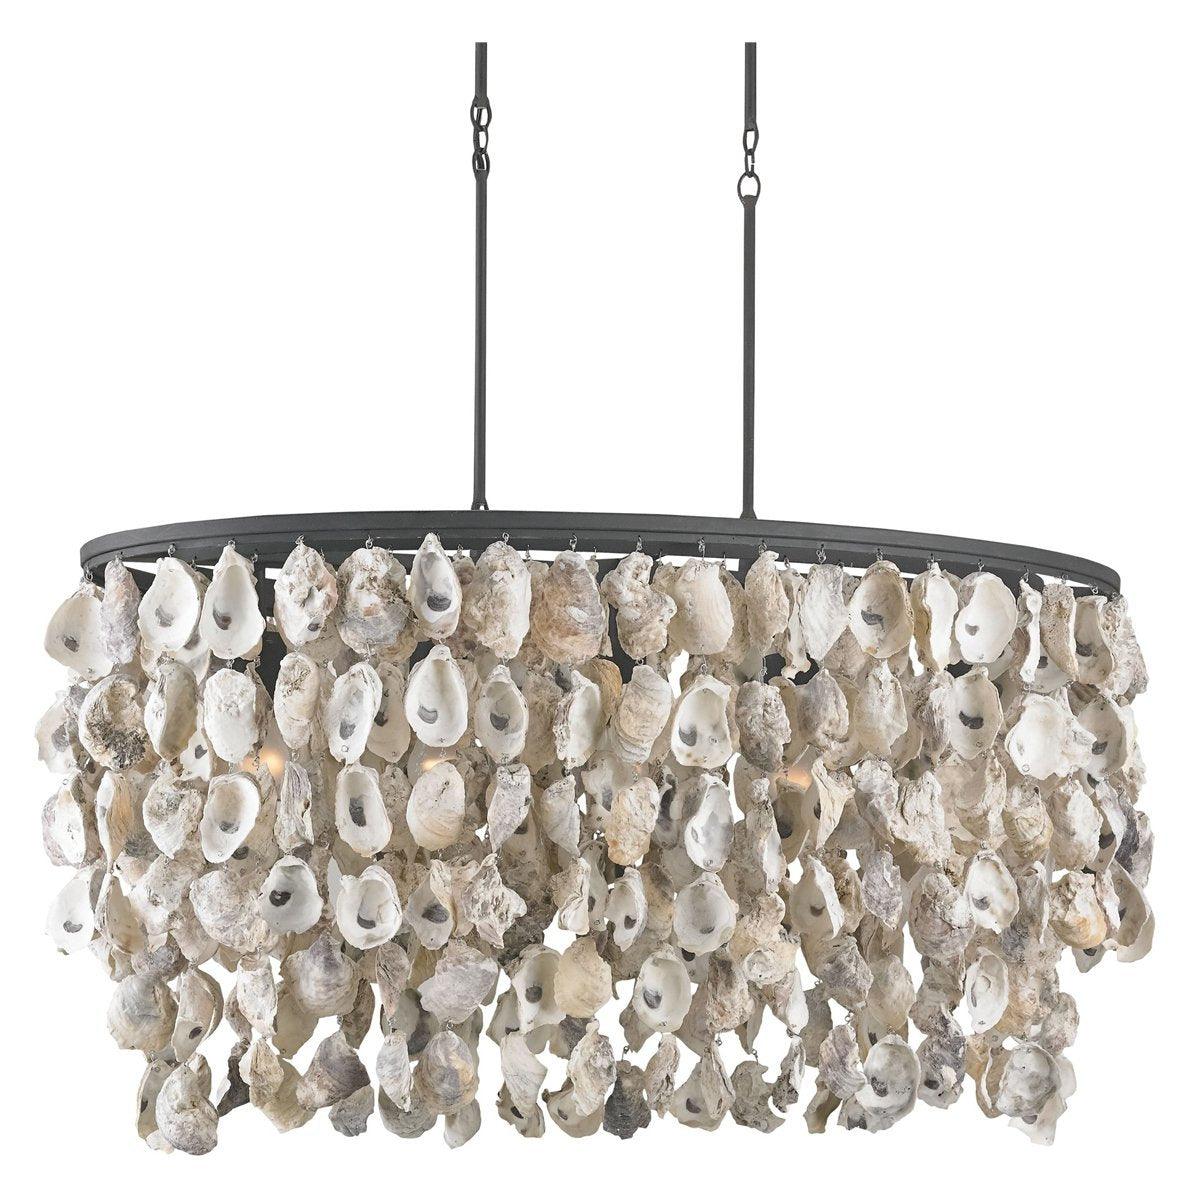 Dripping Oyster Shells Chandelier - Belle Escape